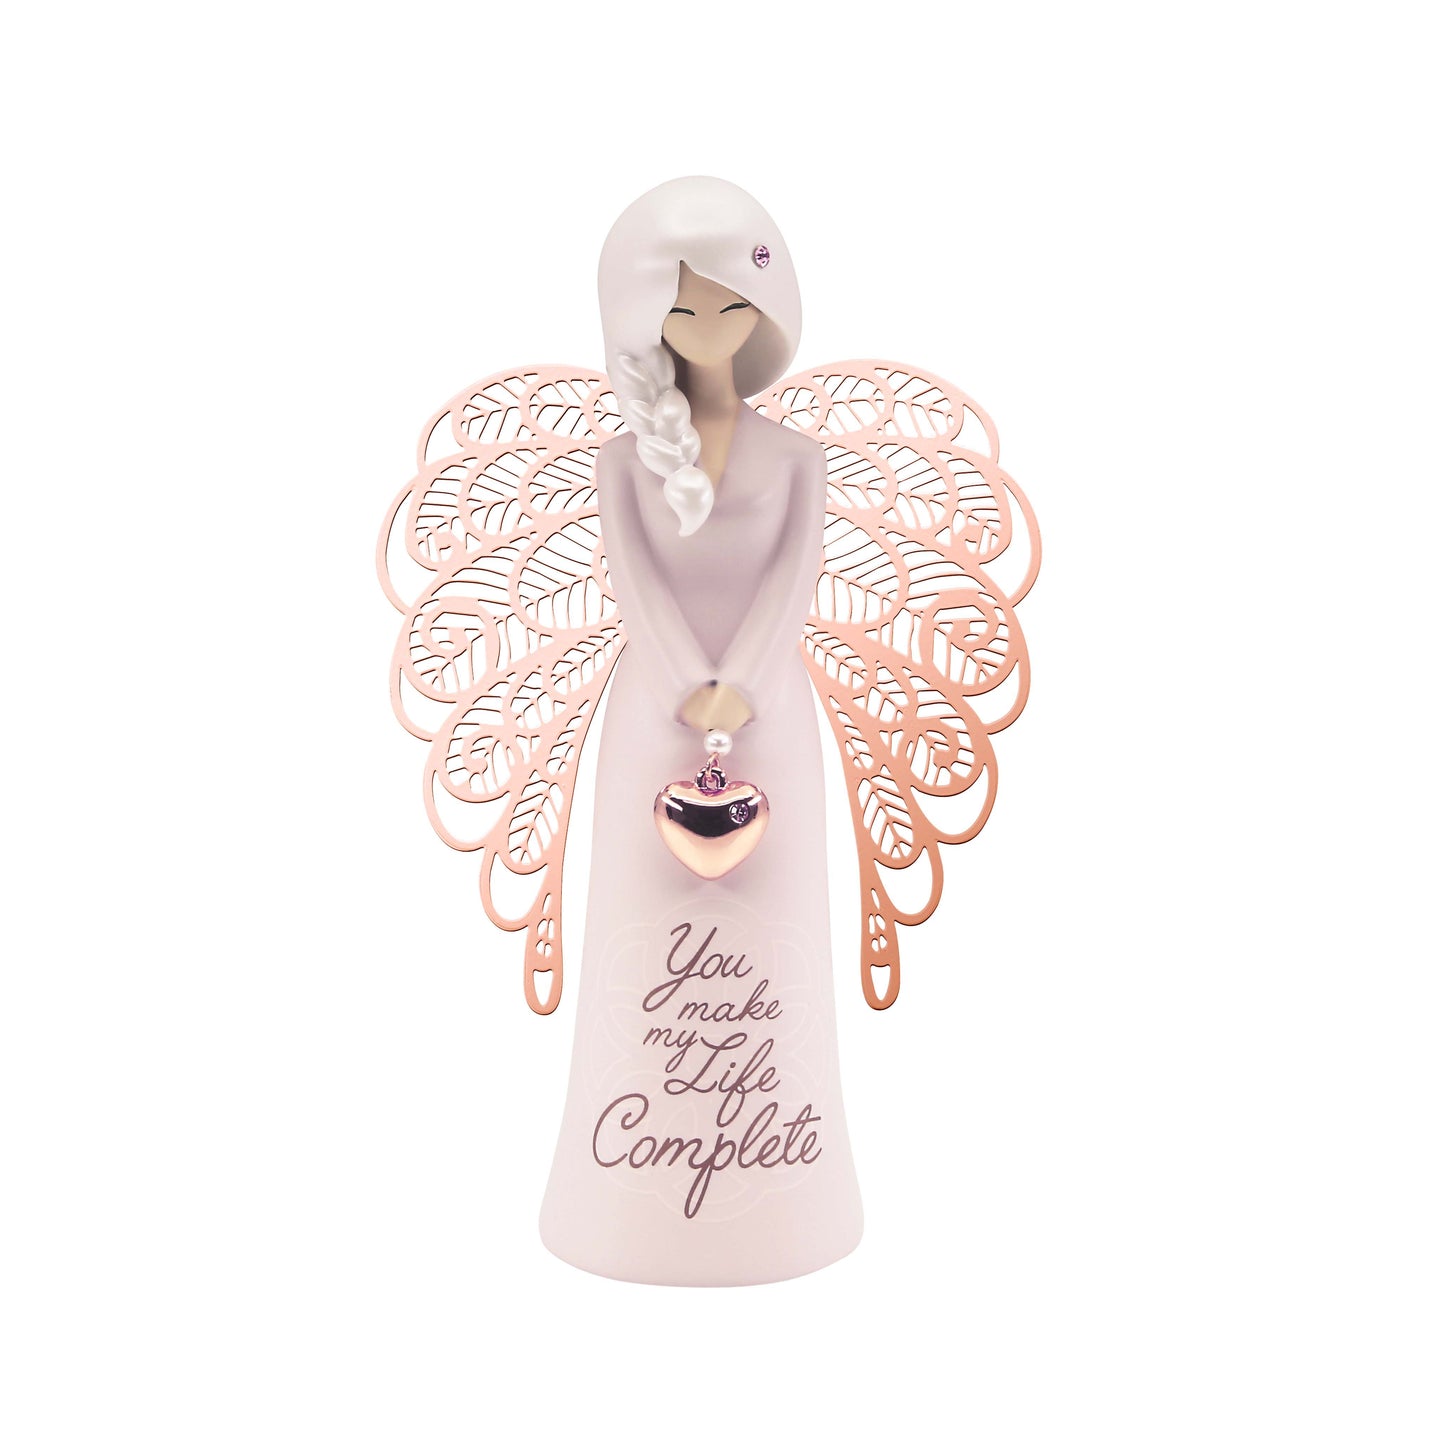 You Are An Angel Life Complete Figurine